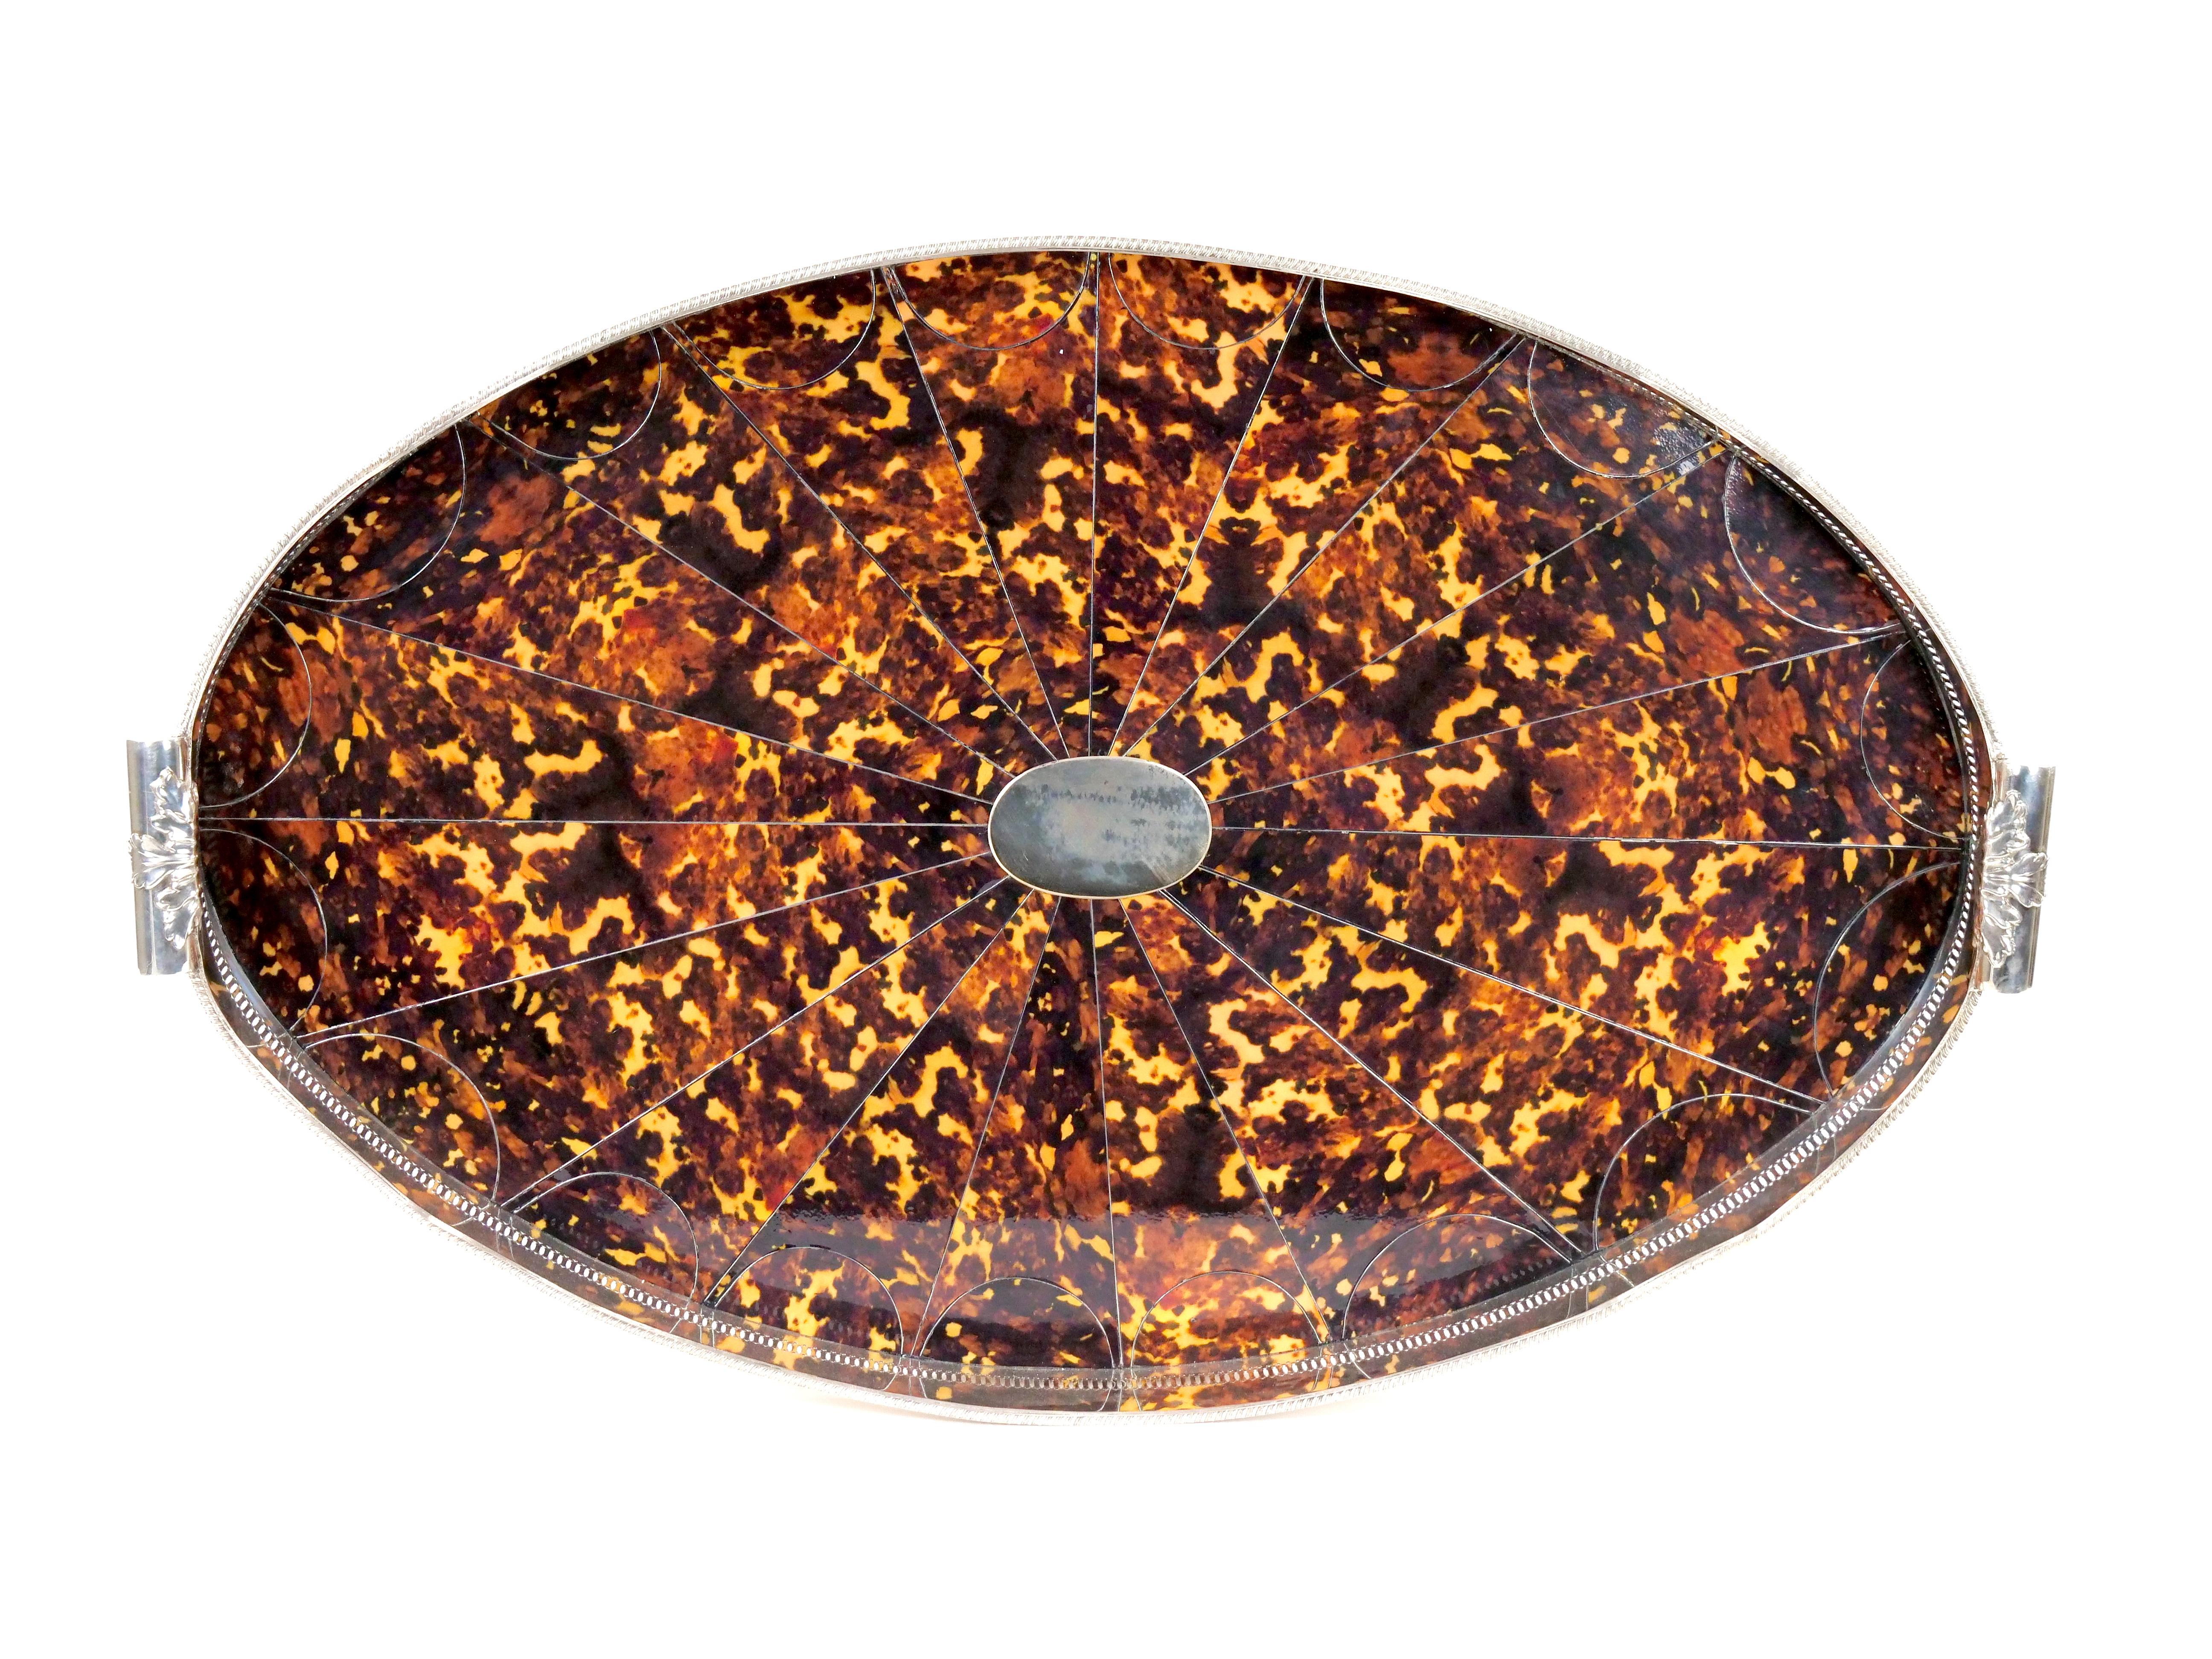 Experience the grandeur of a bygone era with this exquisite Very Large English Sheffield Footed Silver Plate High Border Serving Tray, featuring a captivating Faux Tortoise Shell Inlay interior. Meticulously crafted, this tray embodies the opulence